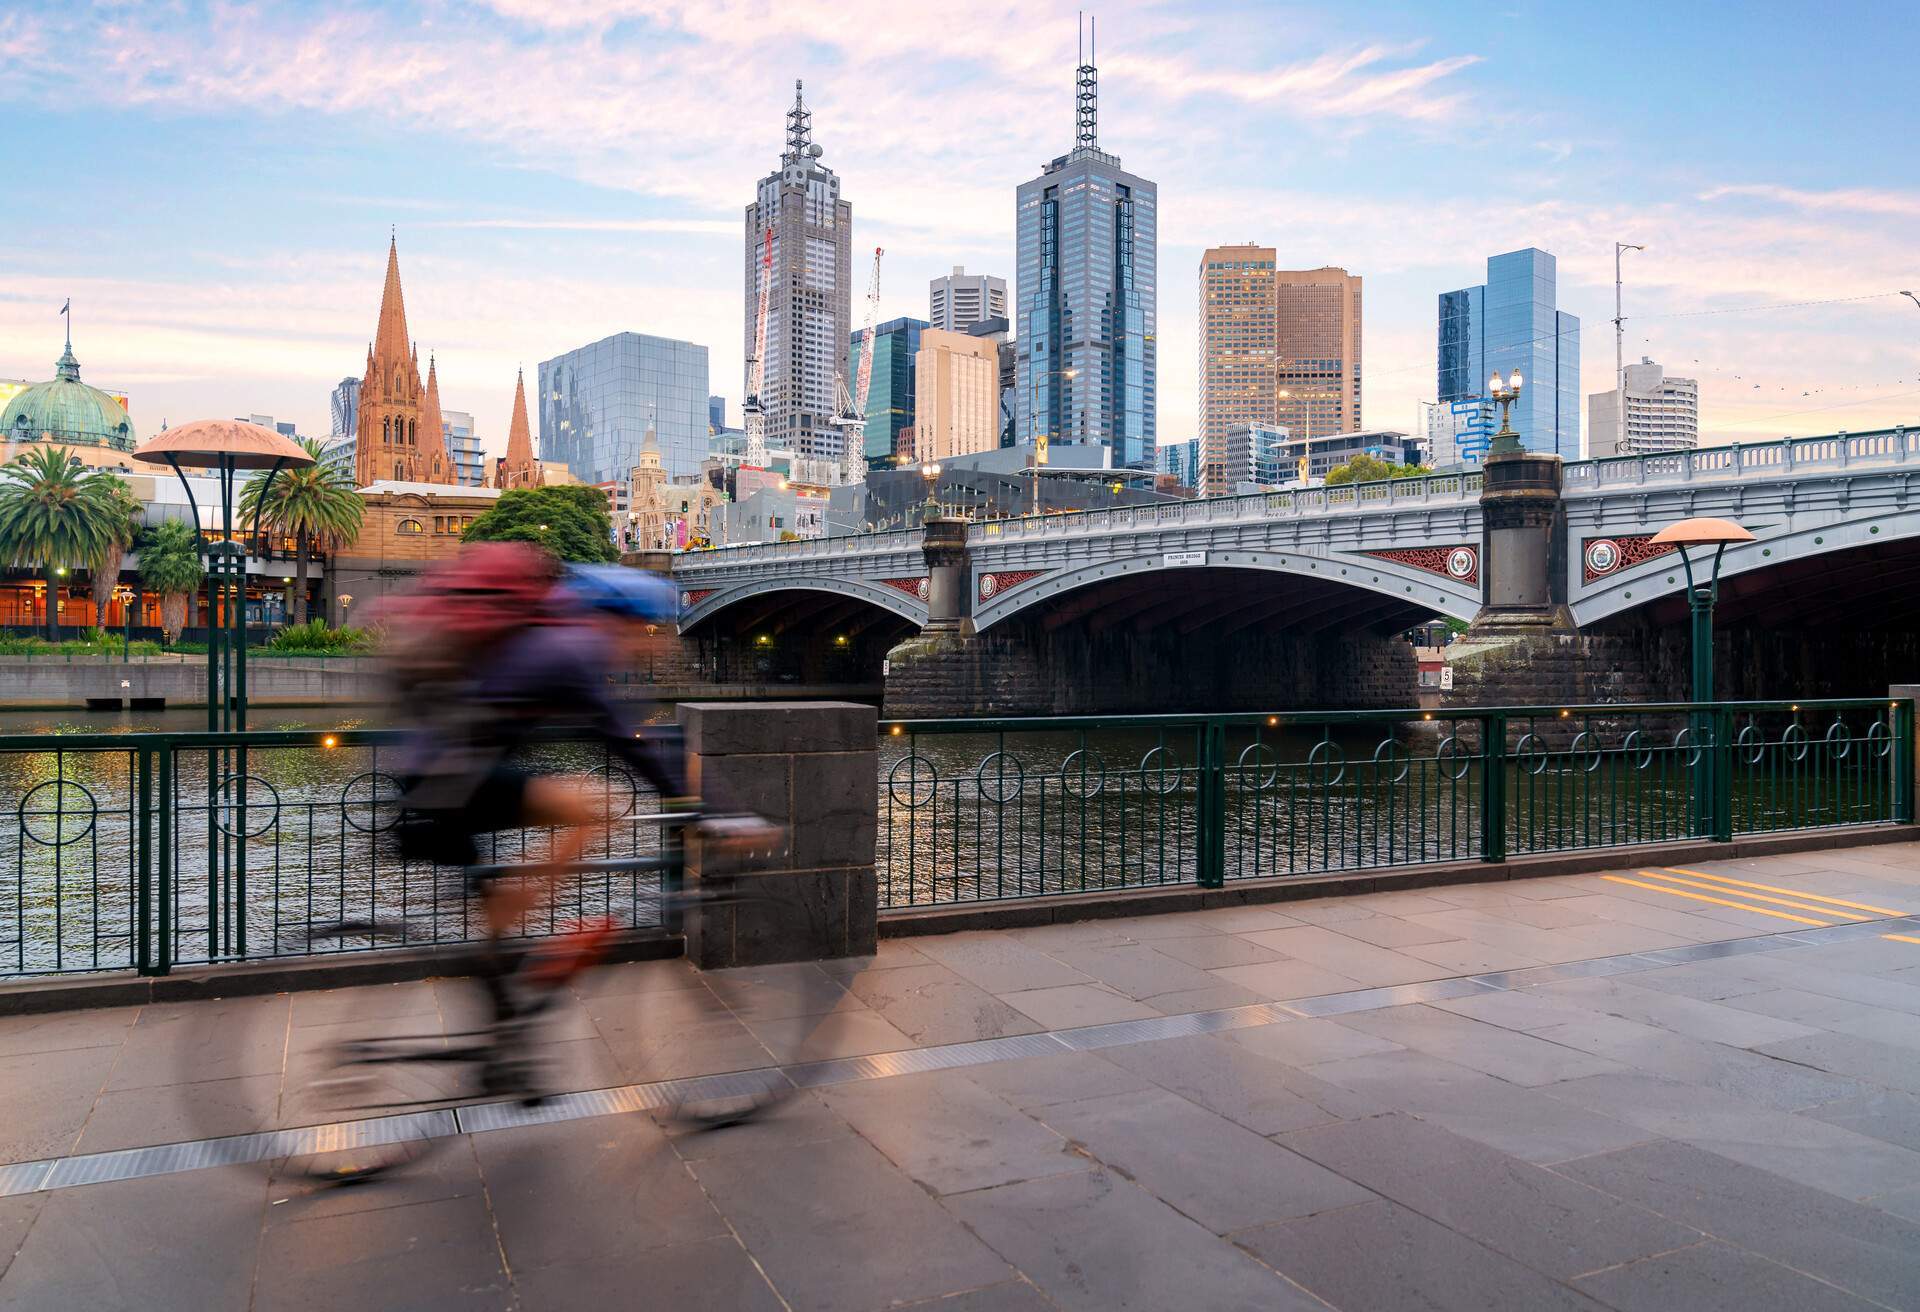 Australian people cycling for exercise near Yarra River with view of the Melbourne City Financial District with skyscrapers in morning at Melbourne, Victoria, Australia.